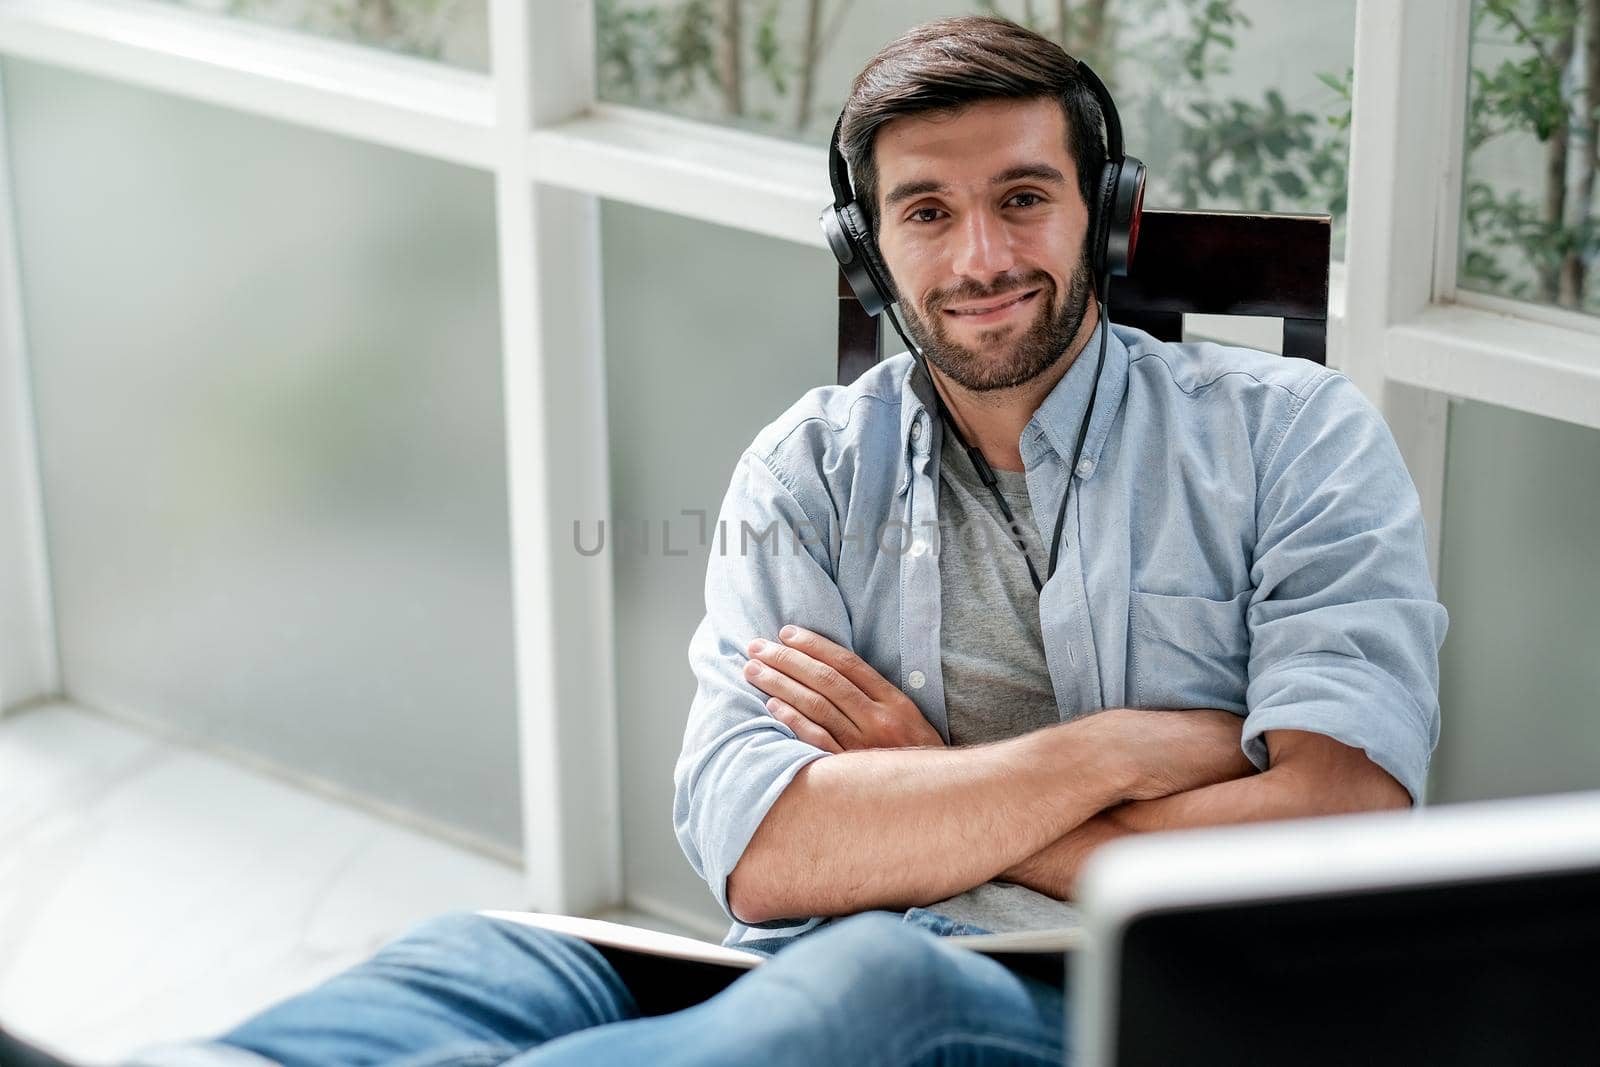 Caucasian man listen music by headphone and sit in room with glass windows with relax and happy expression also look at camera in room with day light.